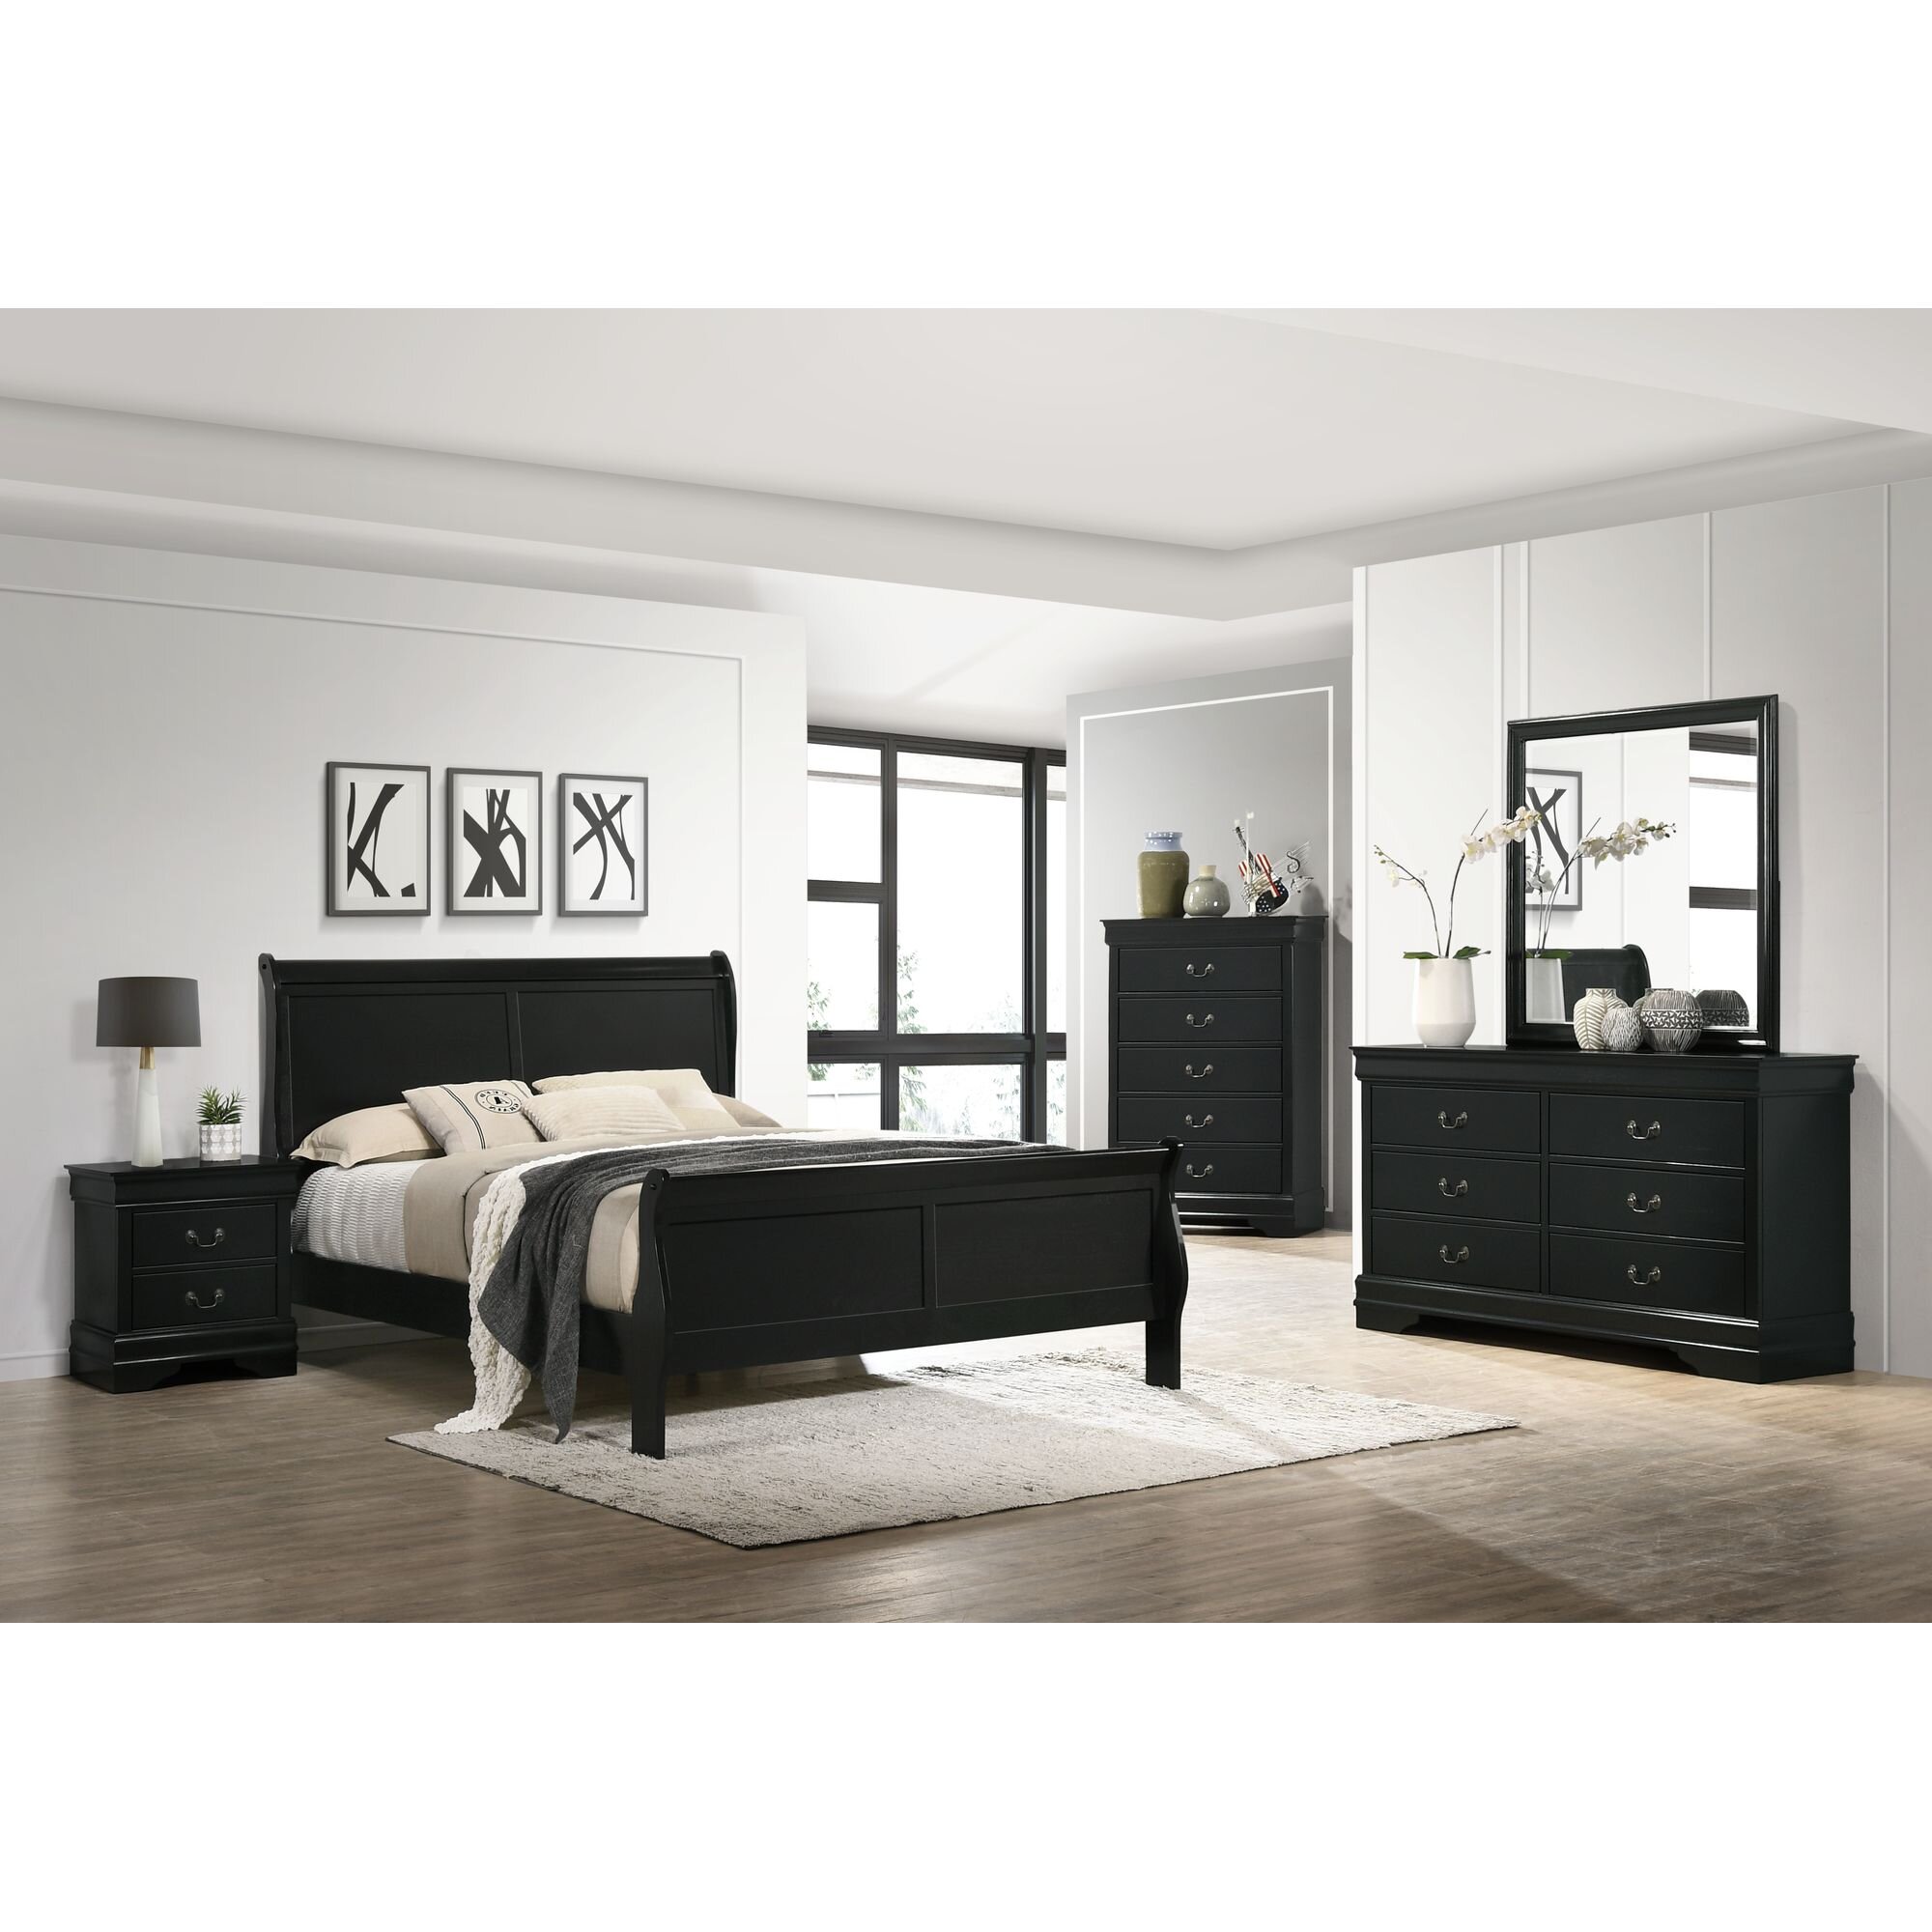 Distressed Finish Bedroom Sets Furniture You Ll Love In 2021 Wayfair